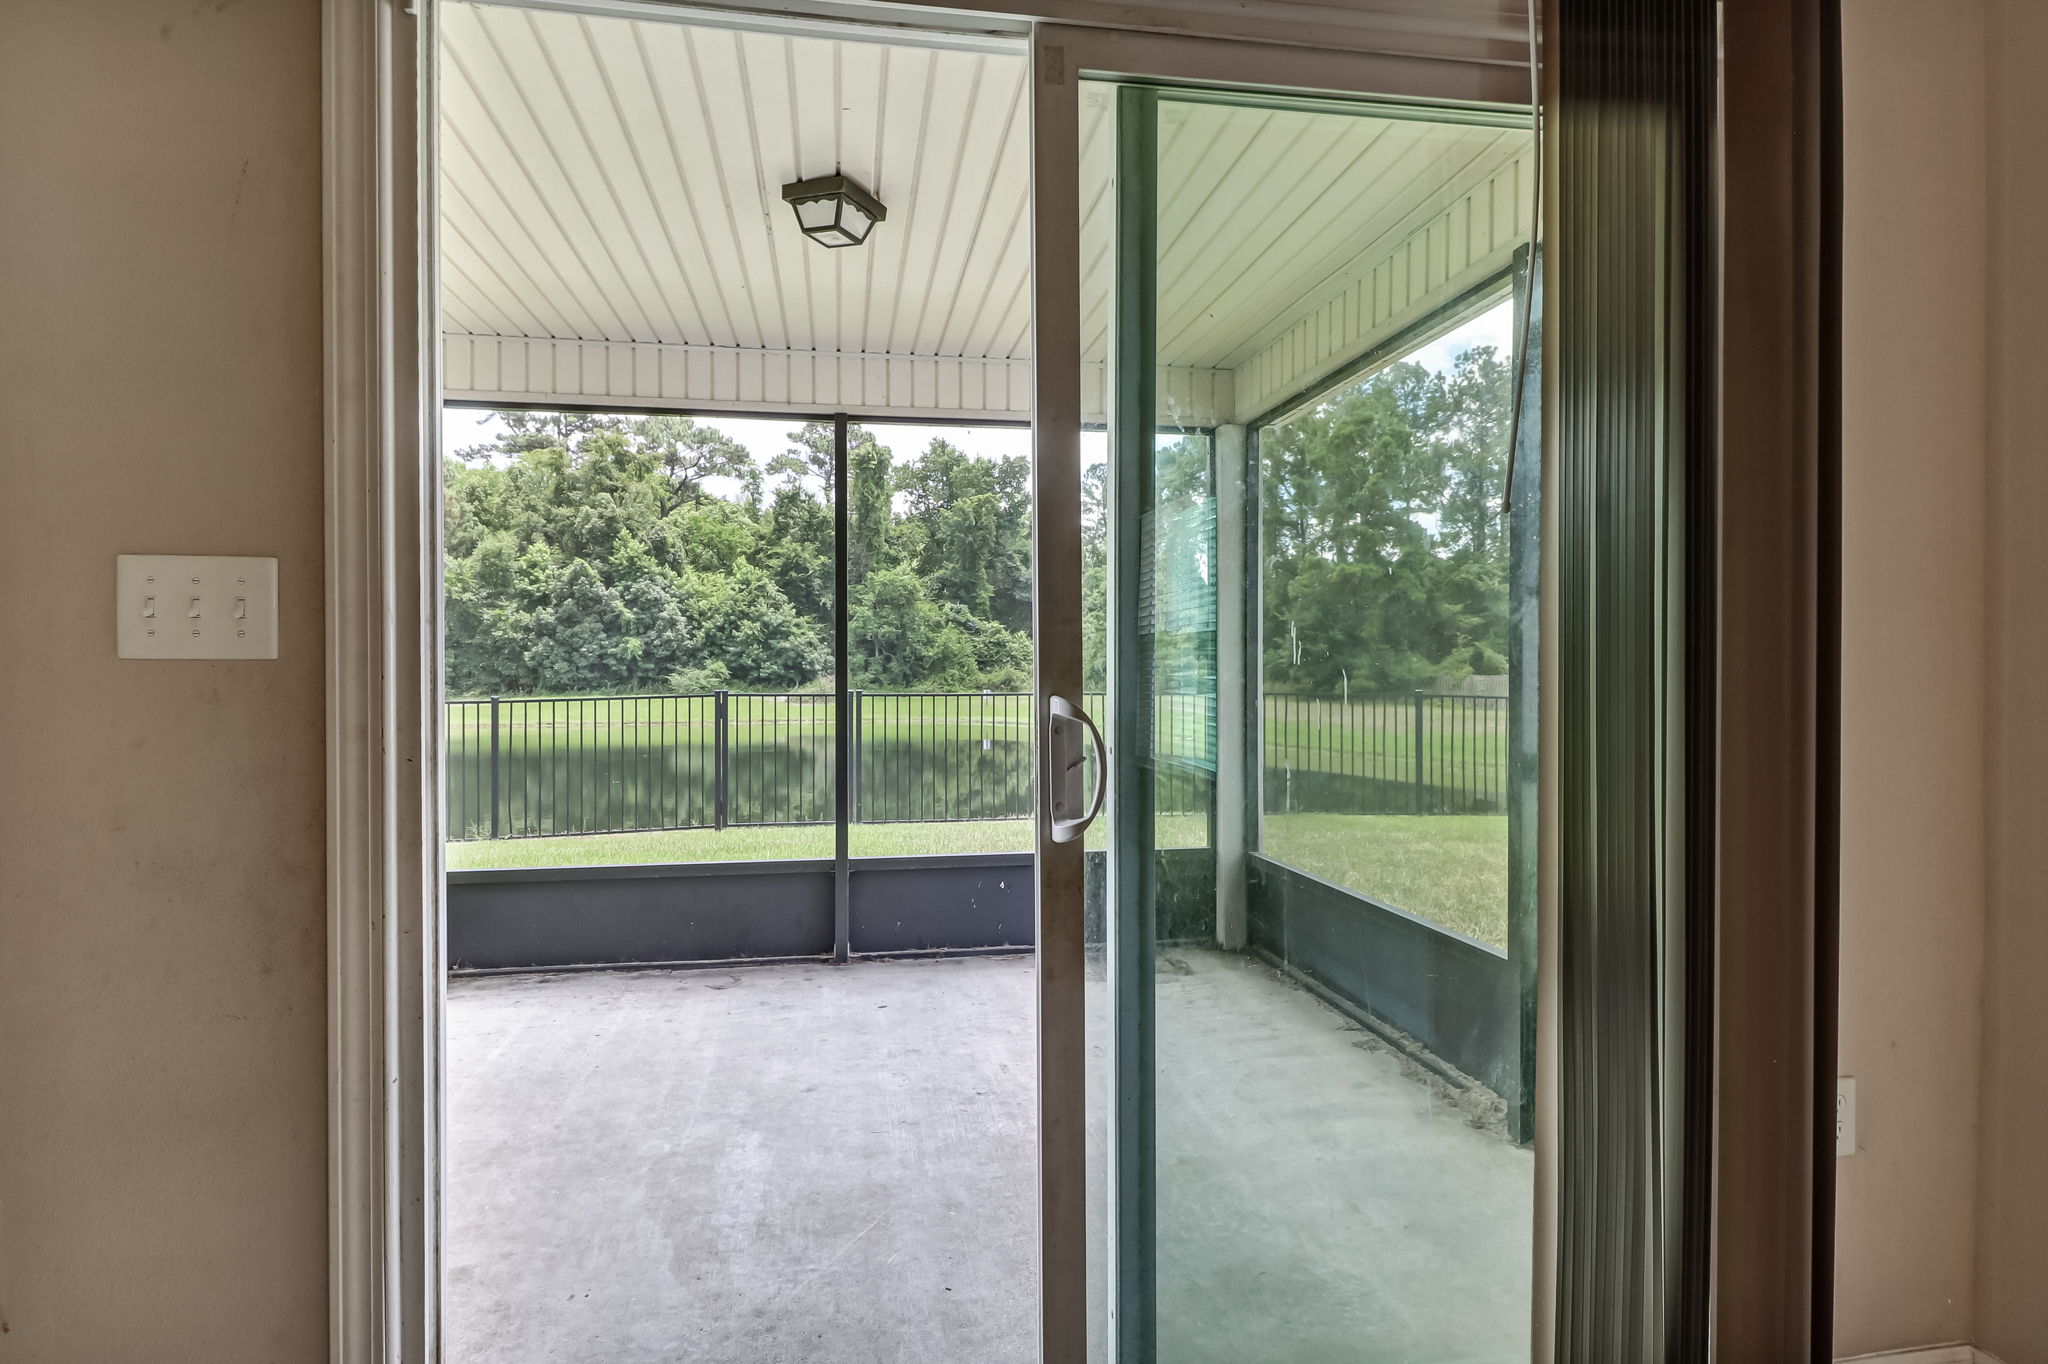 To Screened-in Porch